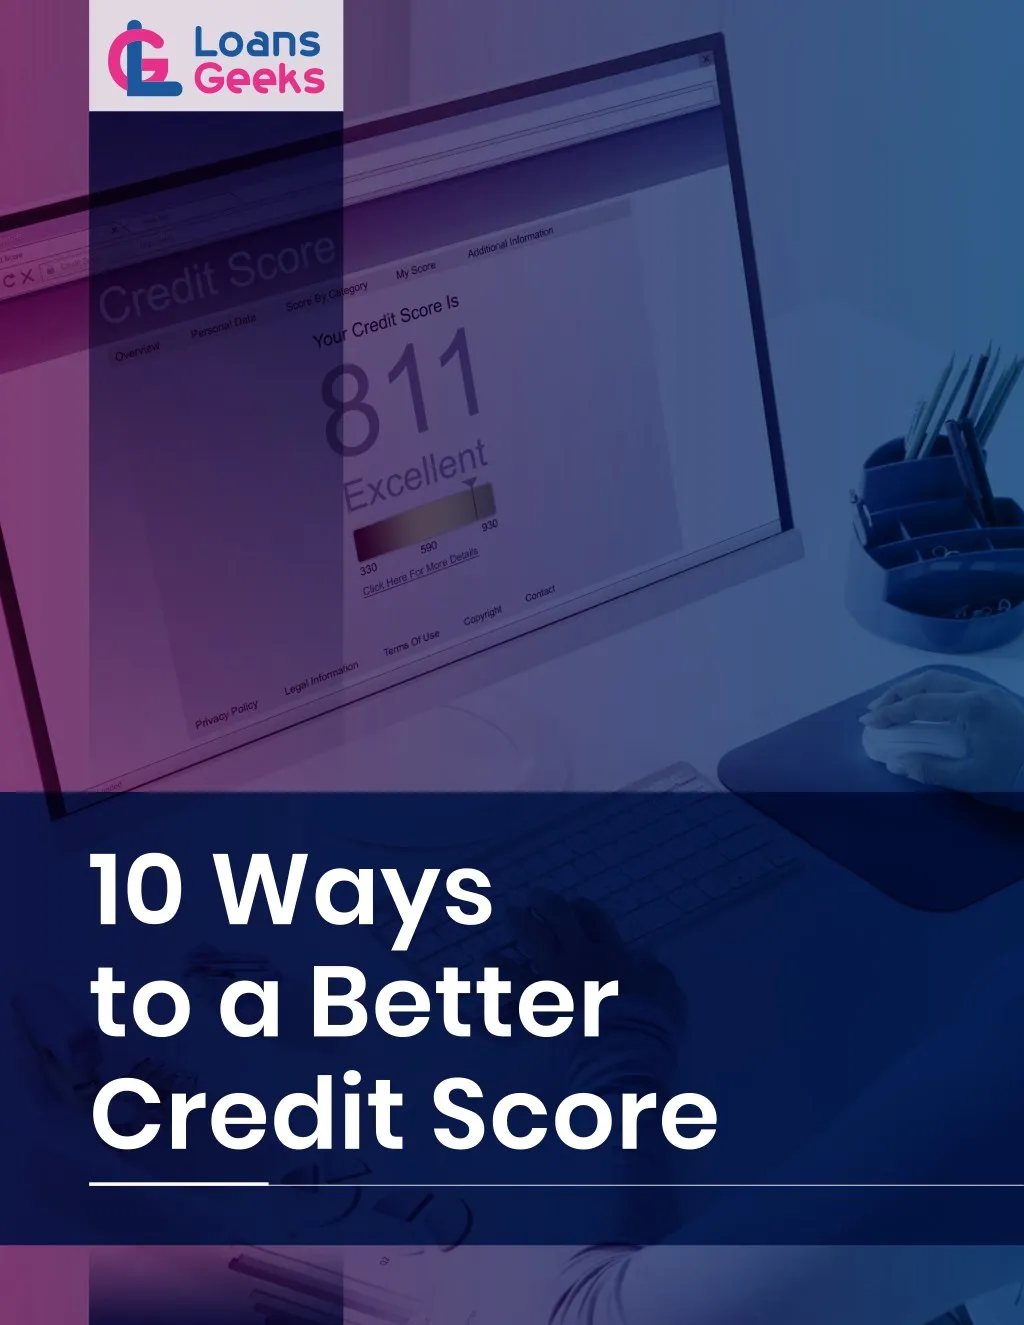 10 ways to a better credit score